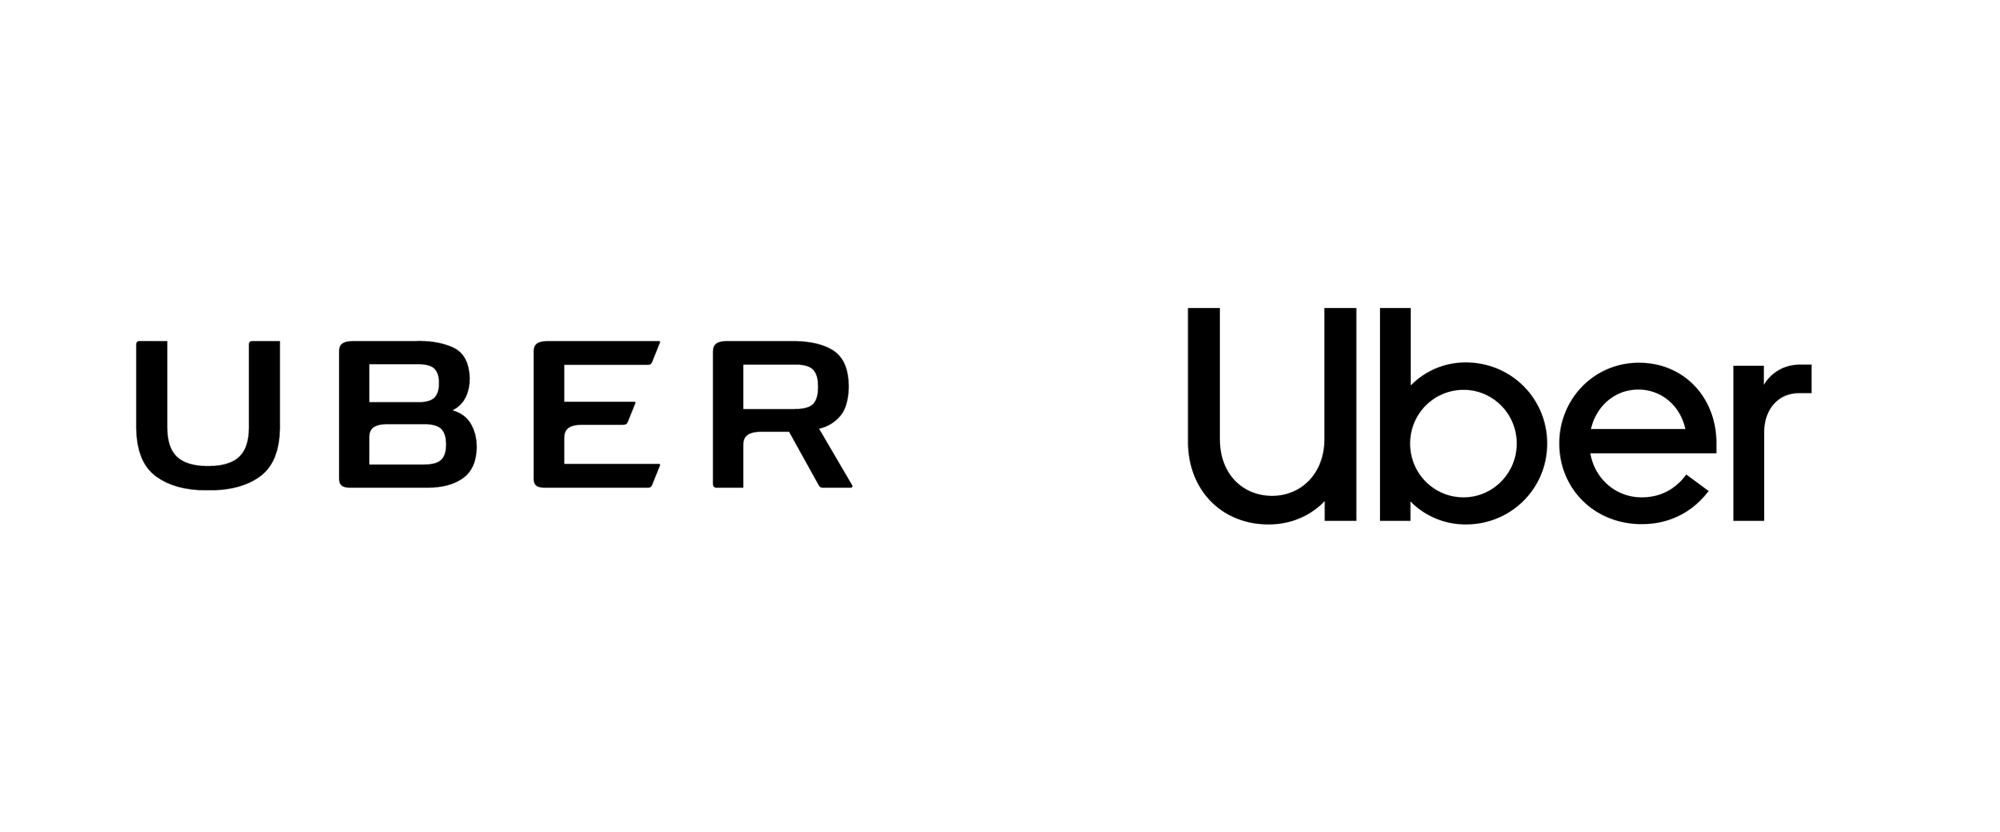 New Logo and Identity for Uber by Wolff Olins and In-house